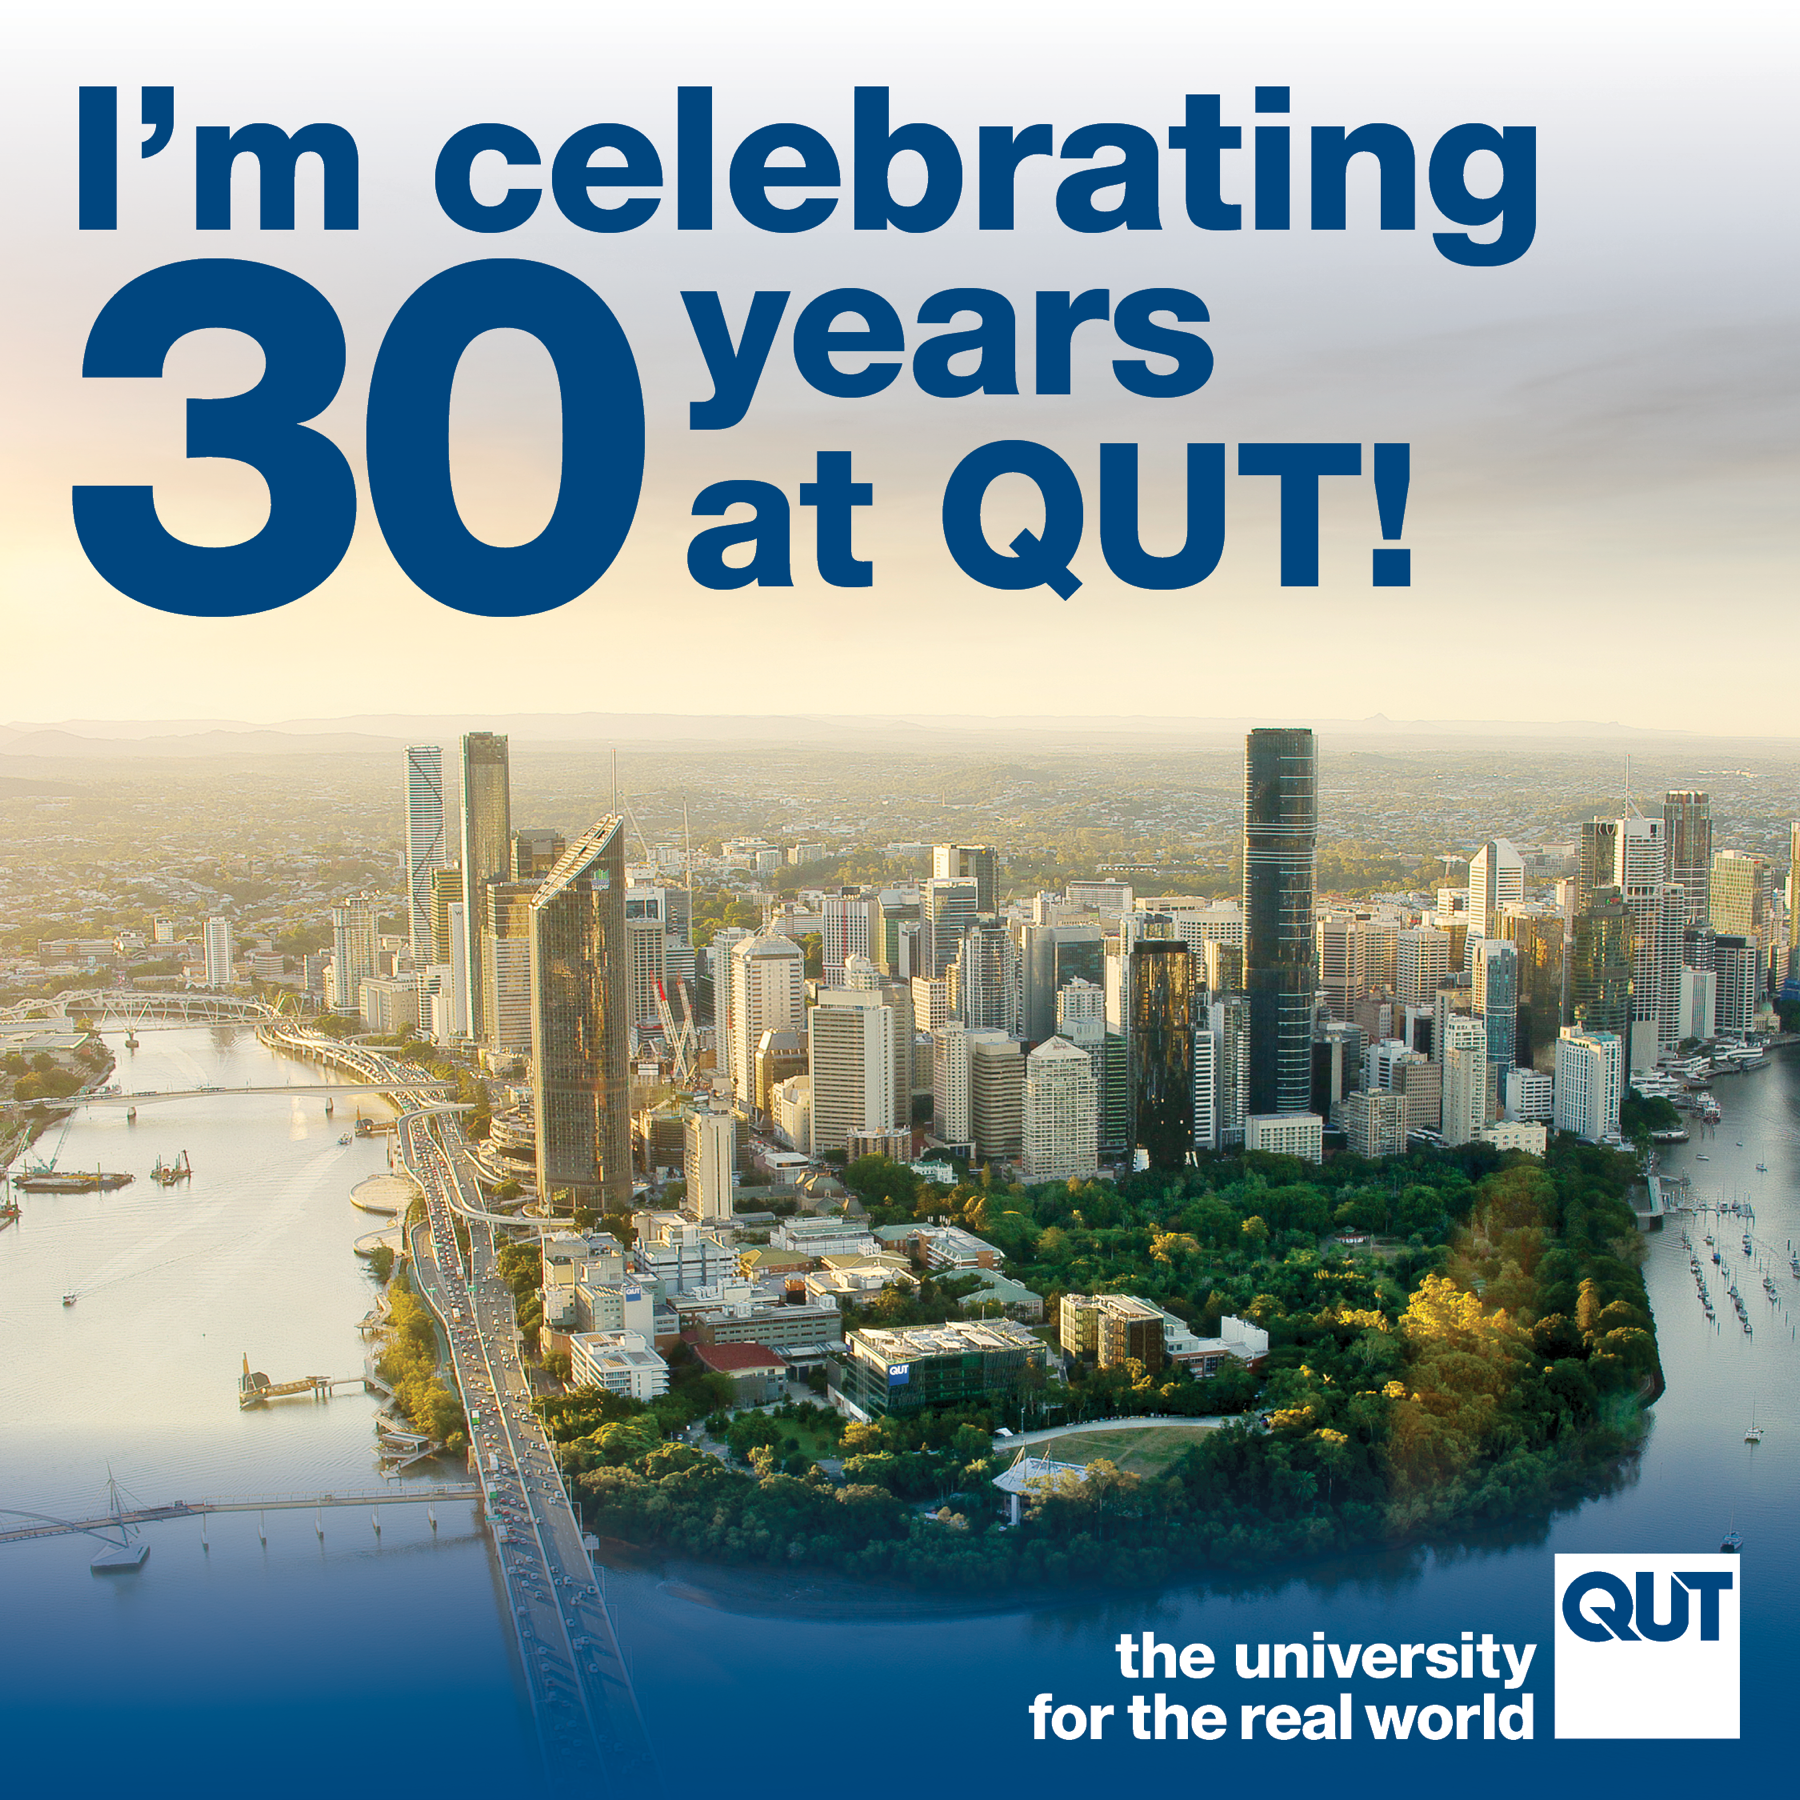 A photo of a university on a bend of the Brisbane river, the CBD in the background. The photo has “I’m celebrating 30 years at QUT!” across the top. In the bottom right is the QUT logo and “university for the real world”.